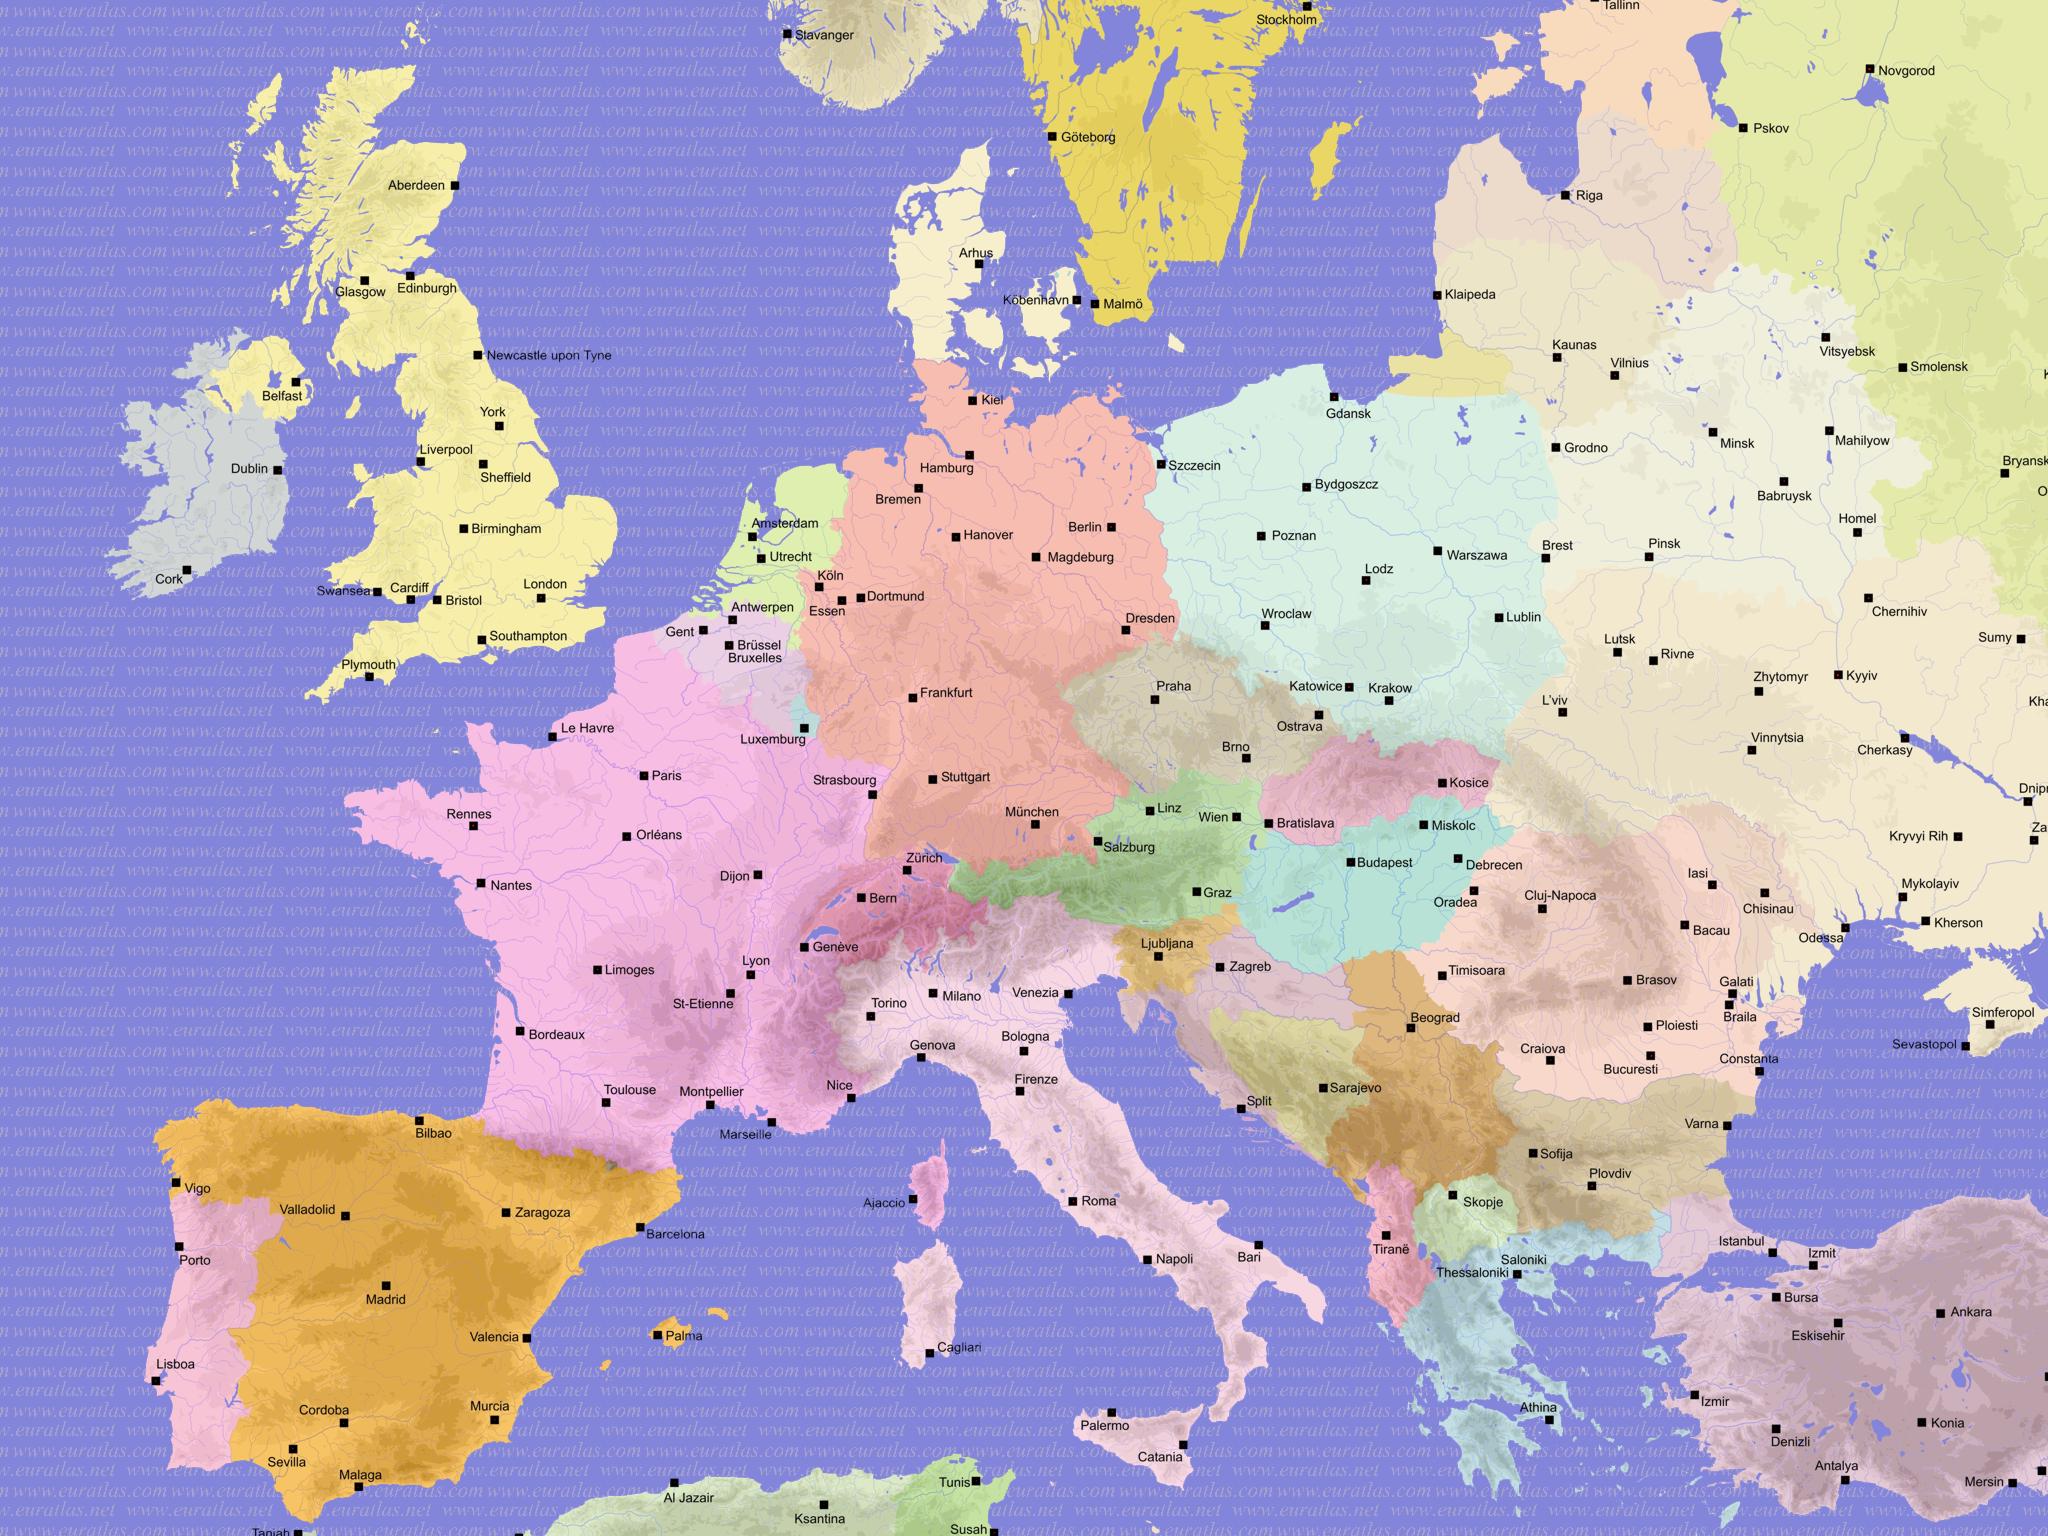 Europe Map Hd Image Download - Map of world